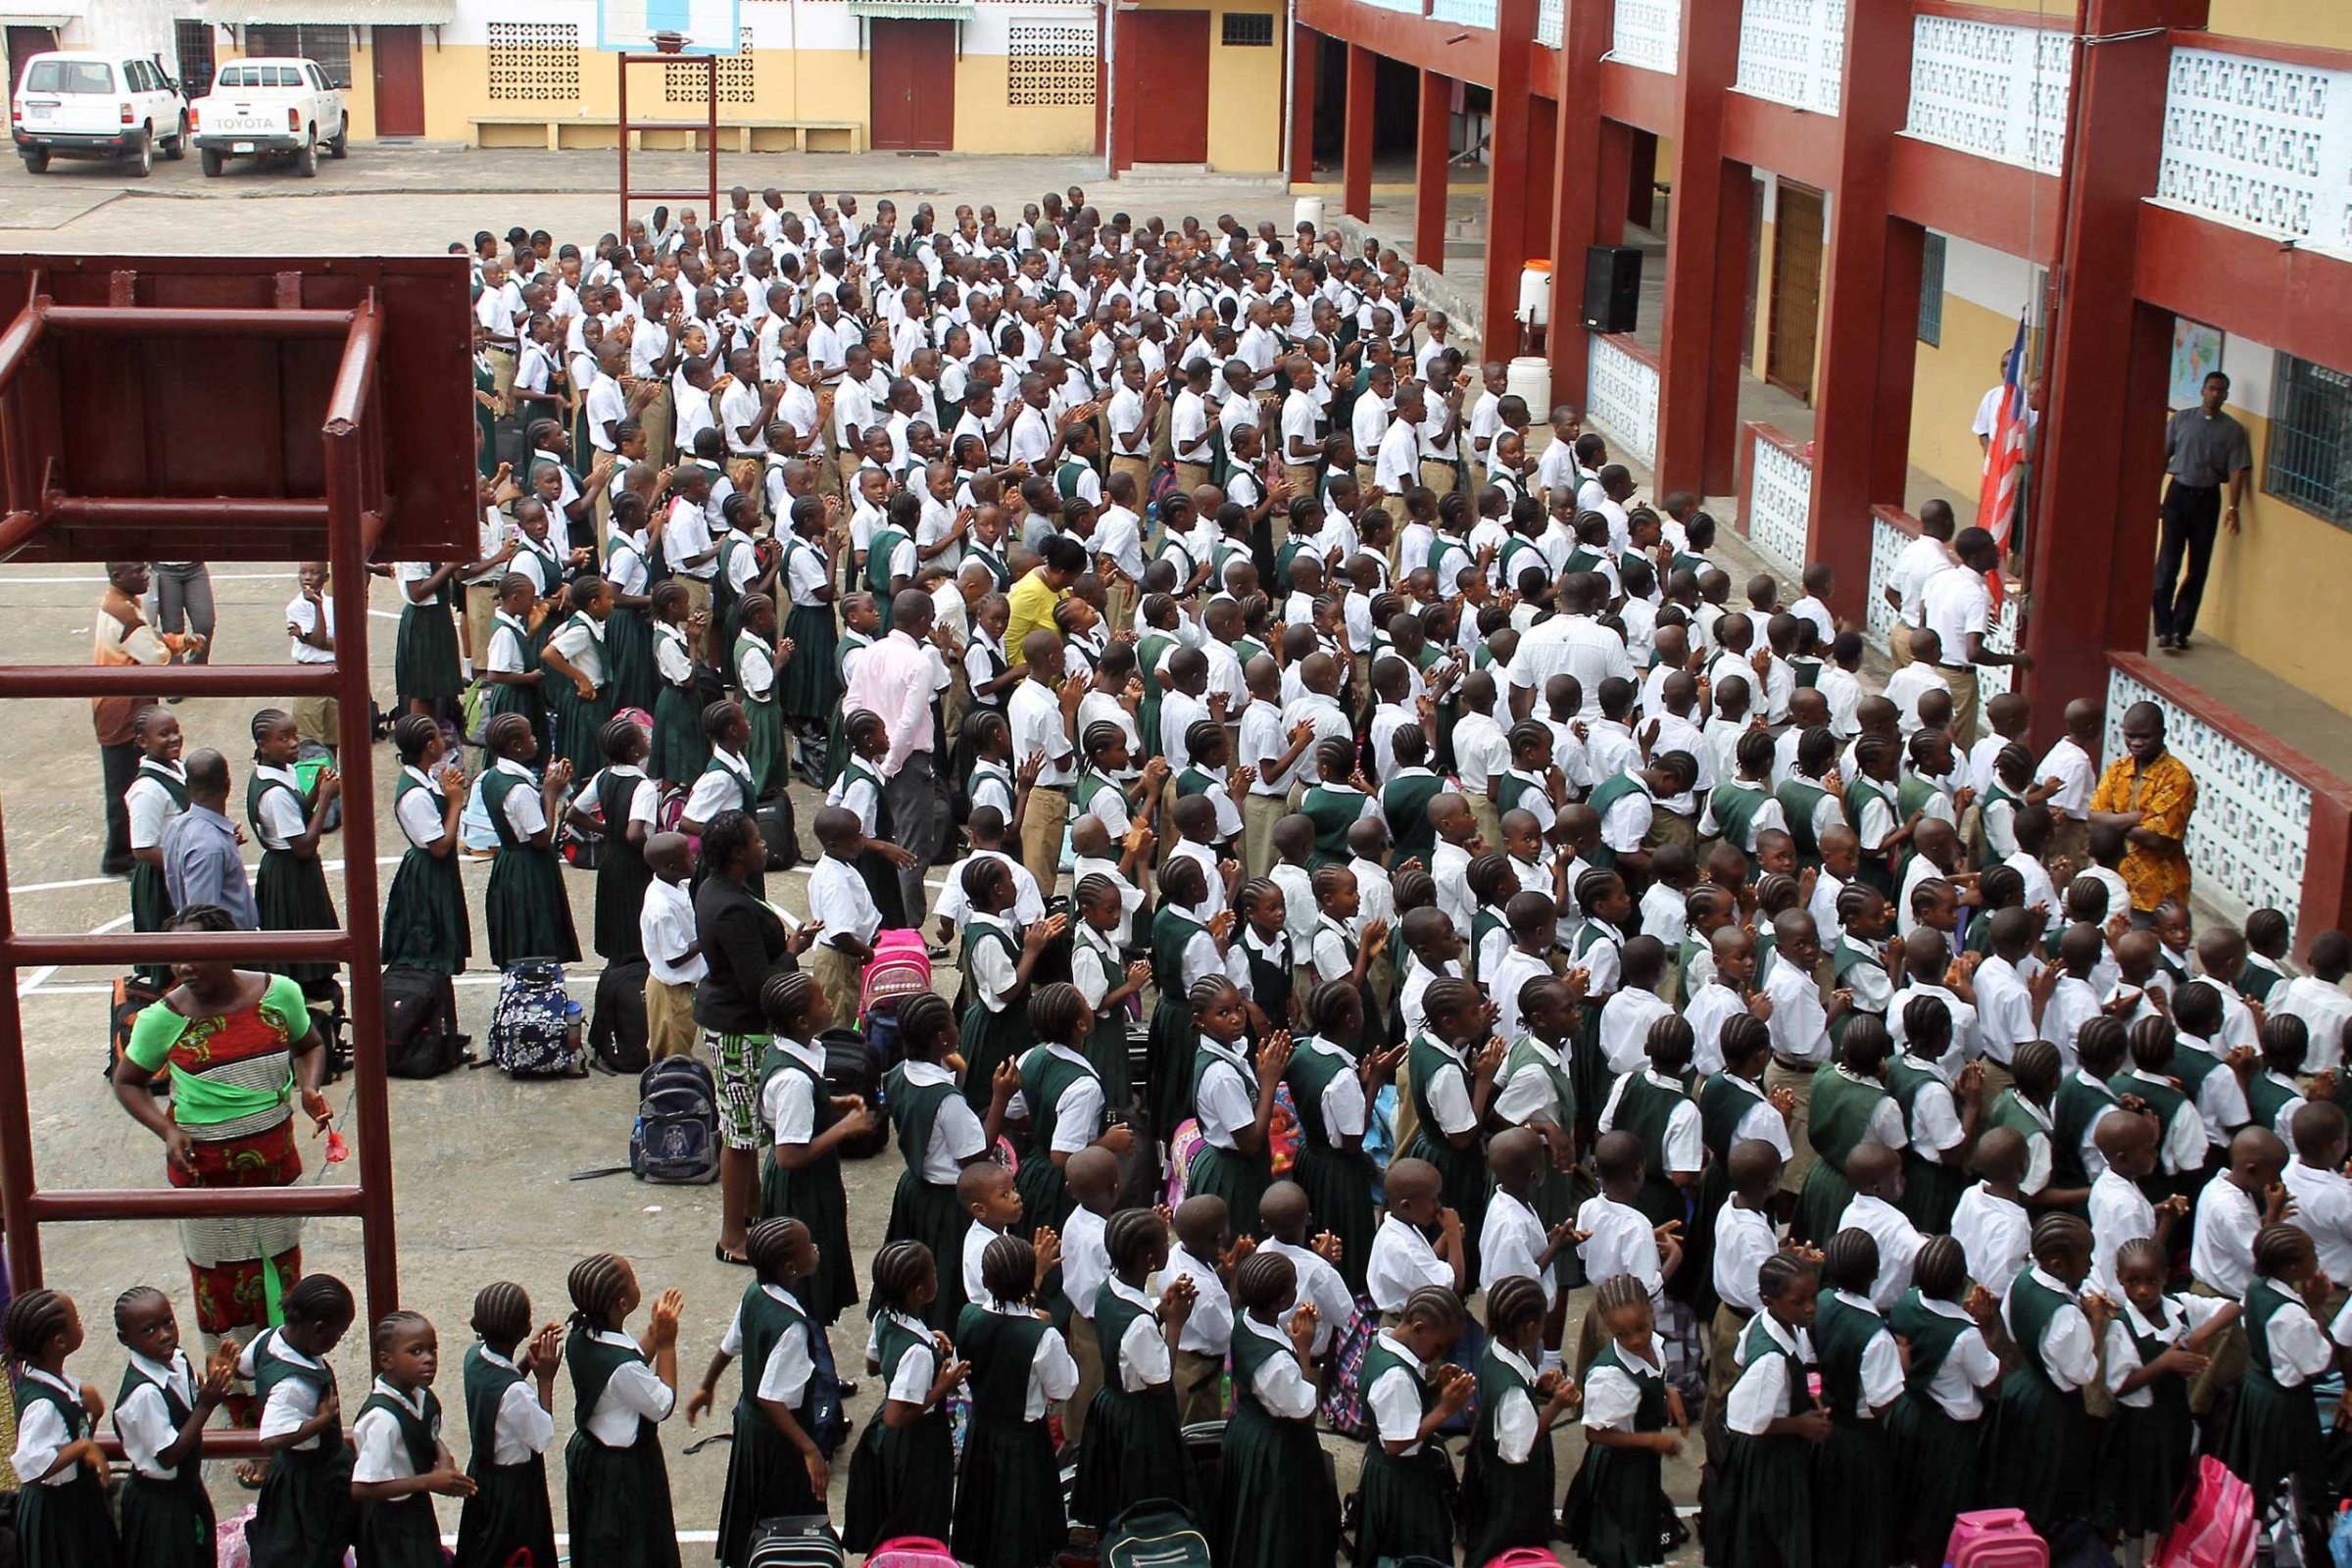 Students stand in line before heading to their classrooms at Don Bosco High School in the Liberian capital Monrovia on Feb. 16, 2015.